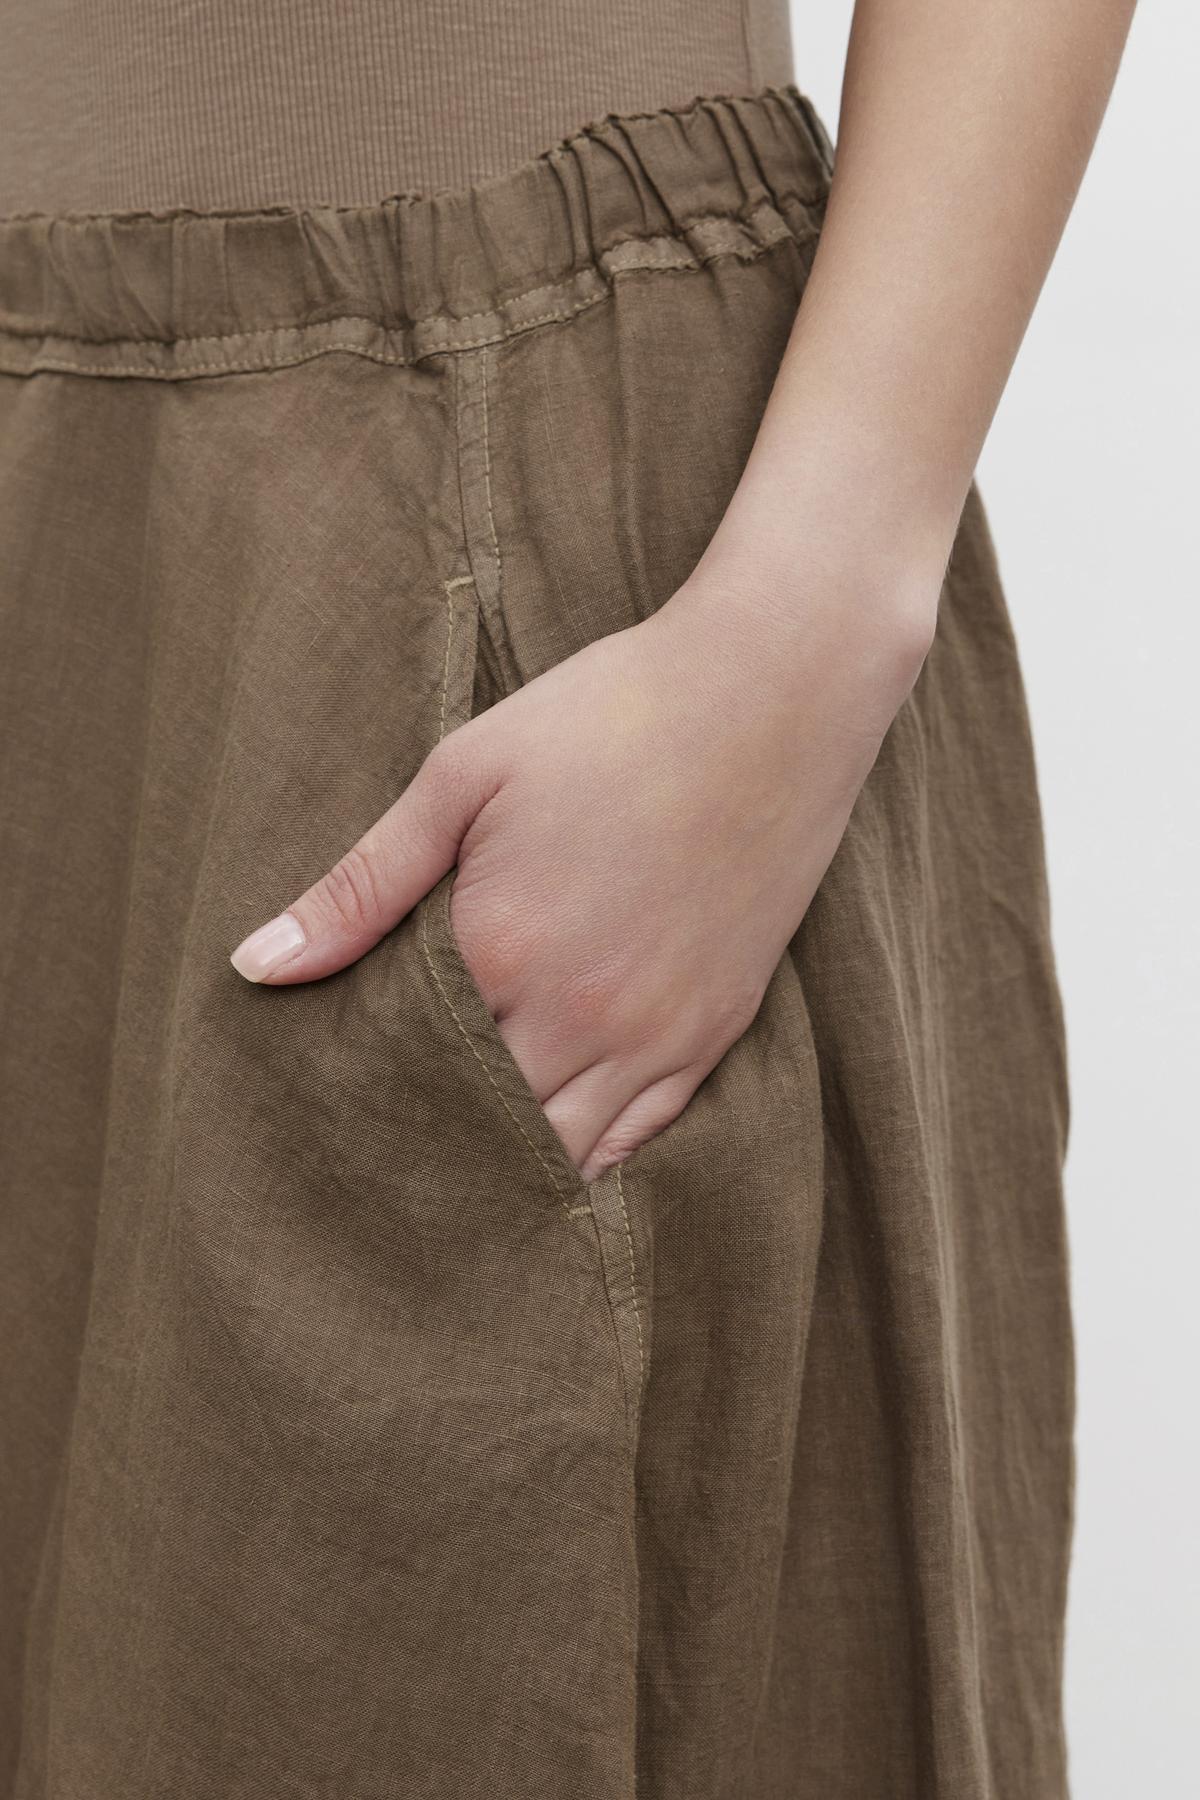   A close-up of a person's hand with fingers tucked into the pocket of a brown linen FAE LINEN A-LINE SKIRT by Velvet by Graham & Spencer. 